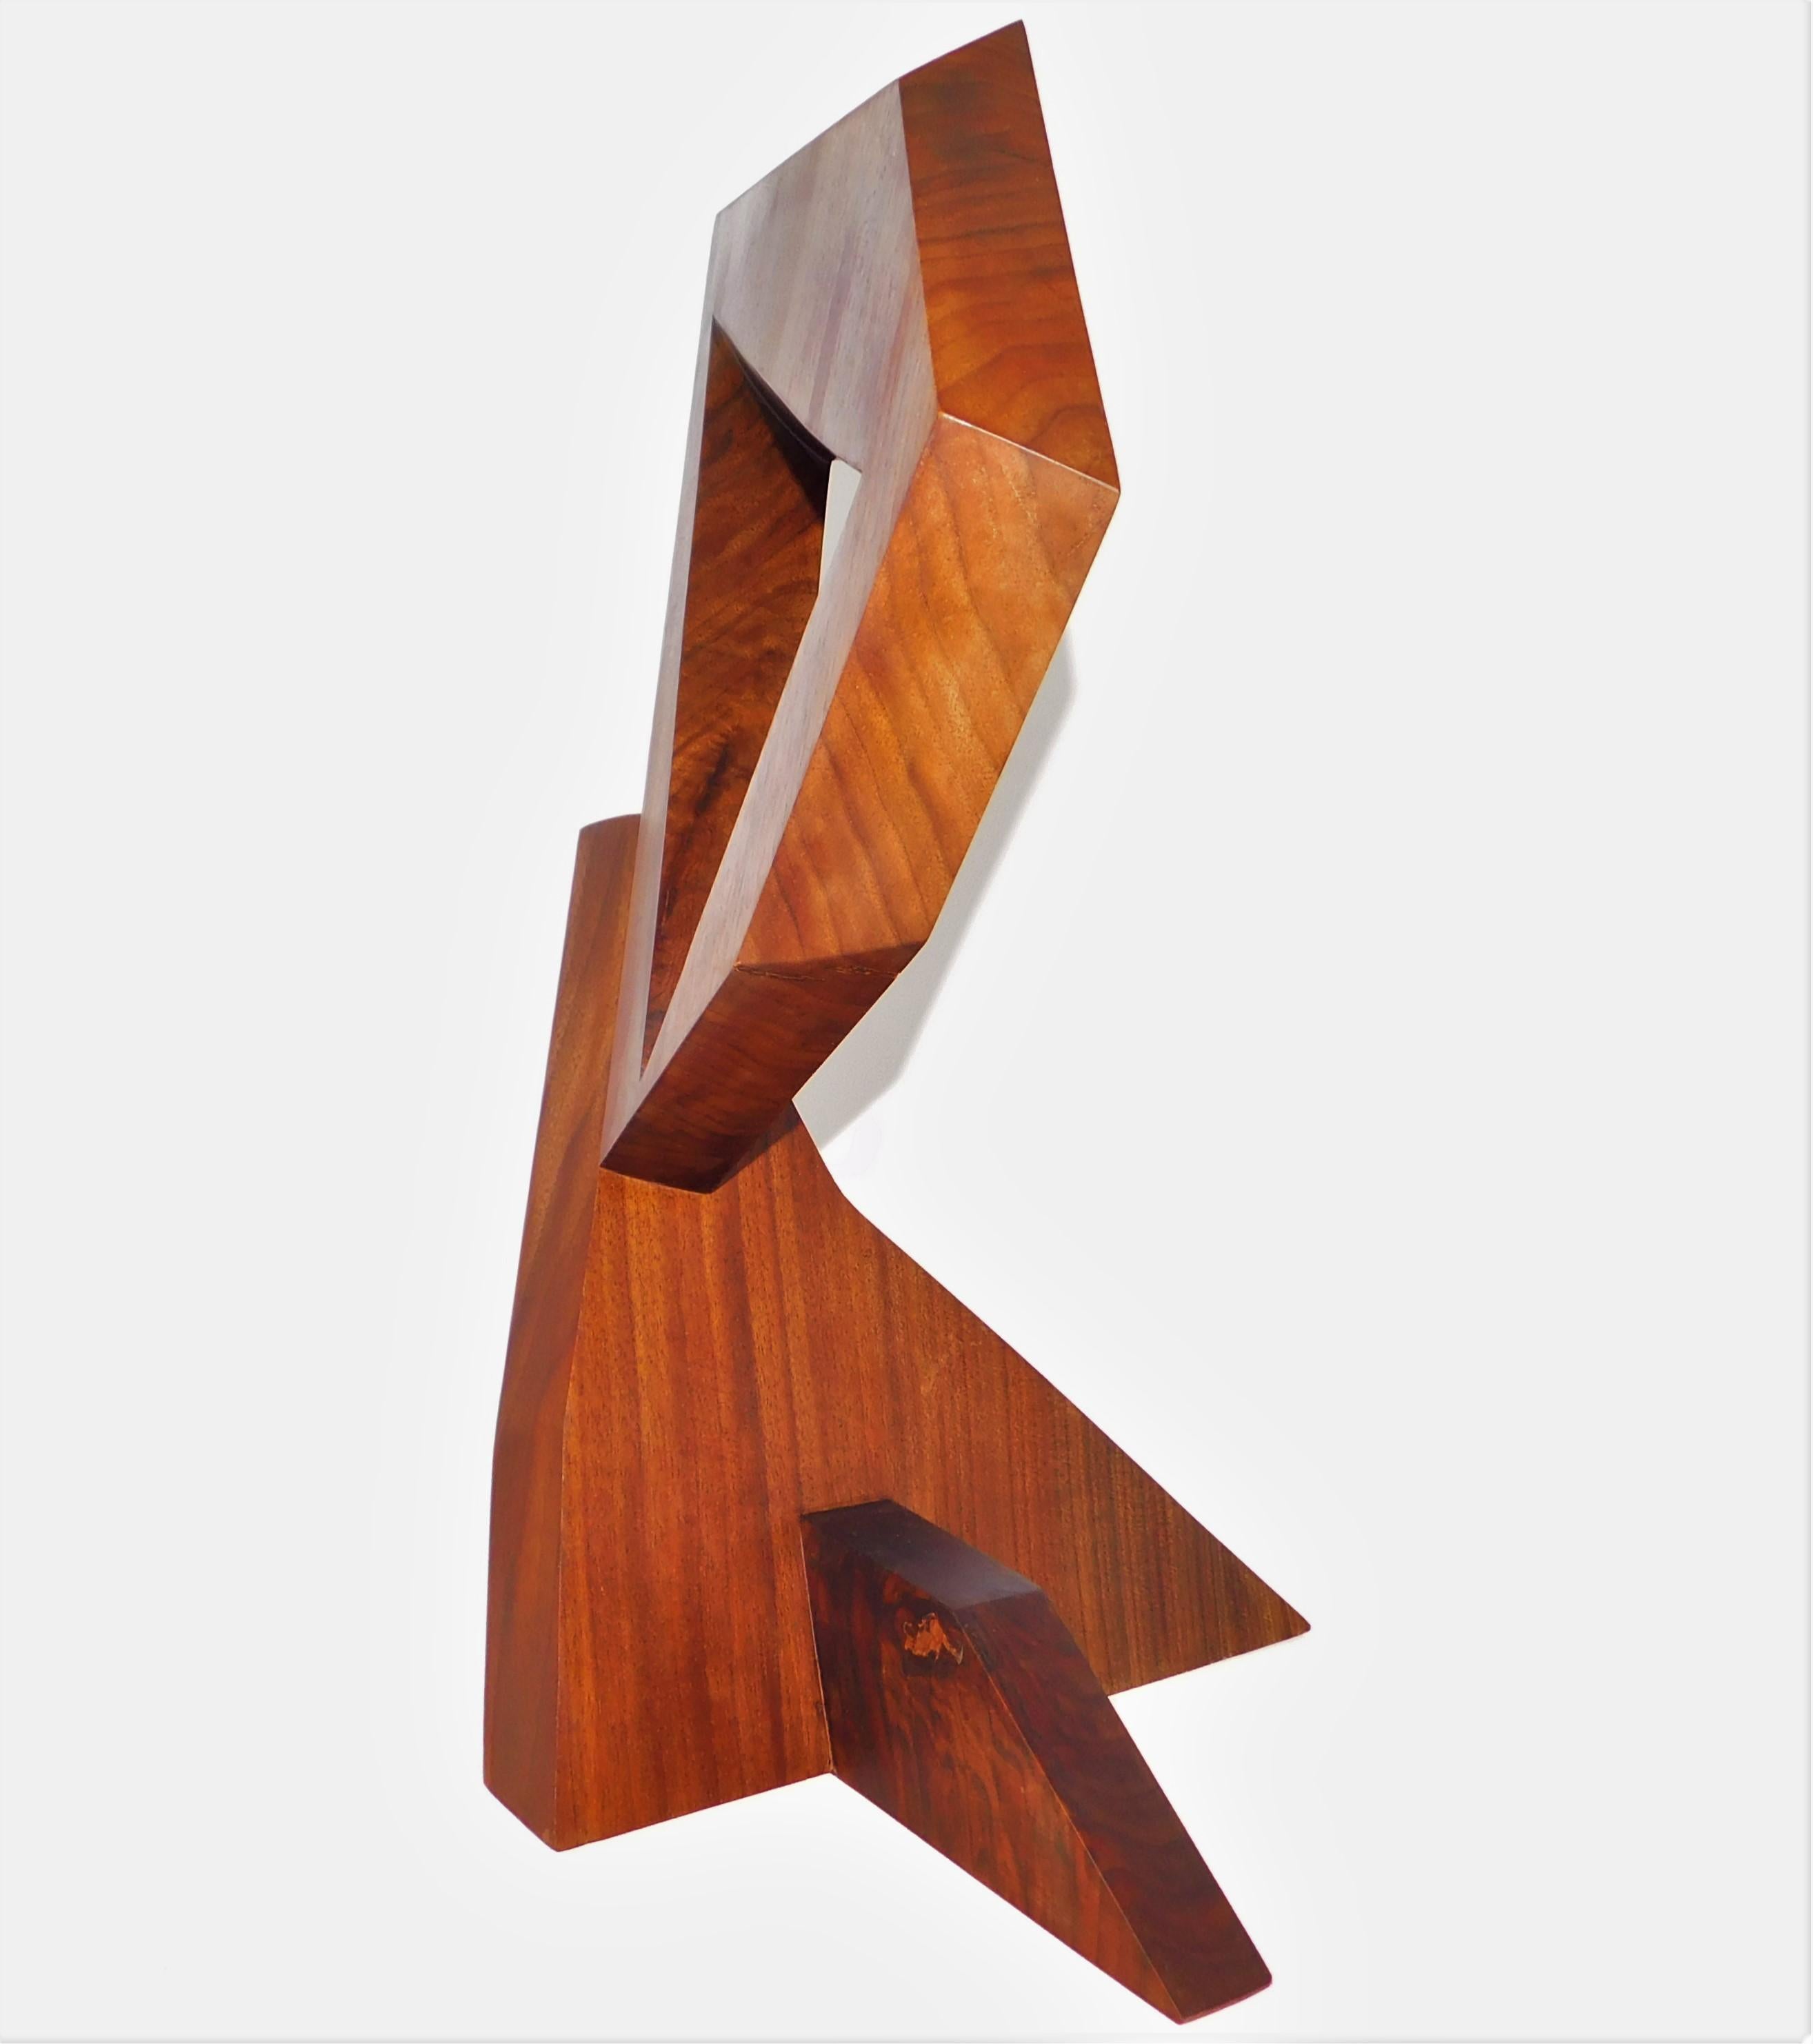 Canadian Modern Abstract Constructivist Walnut Wood Sculpture Signed Czeslaw Budny  For Sale